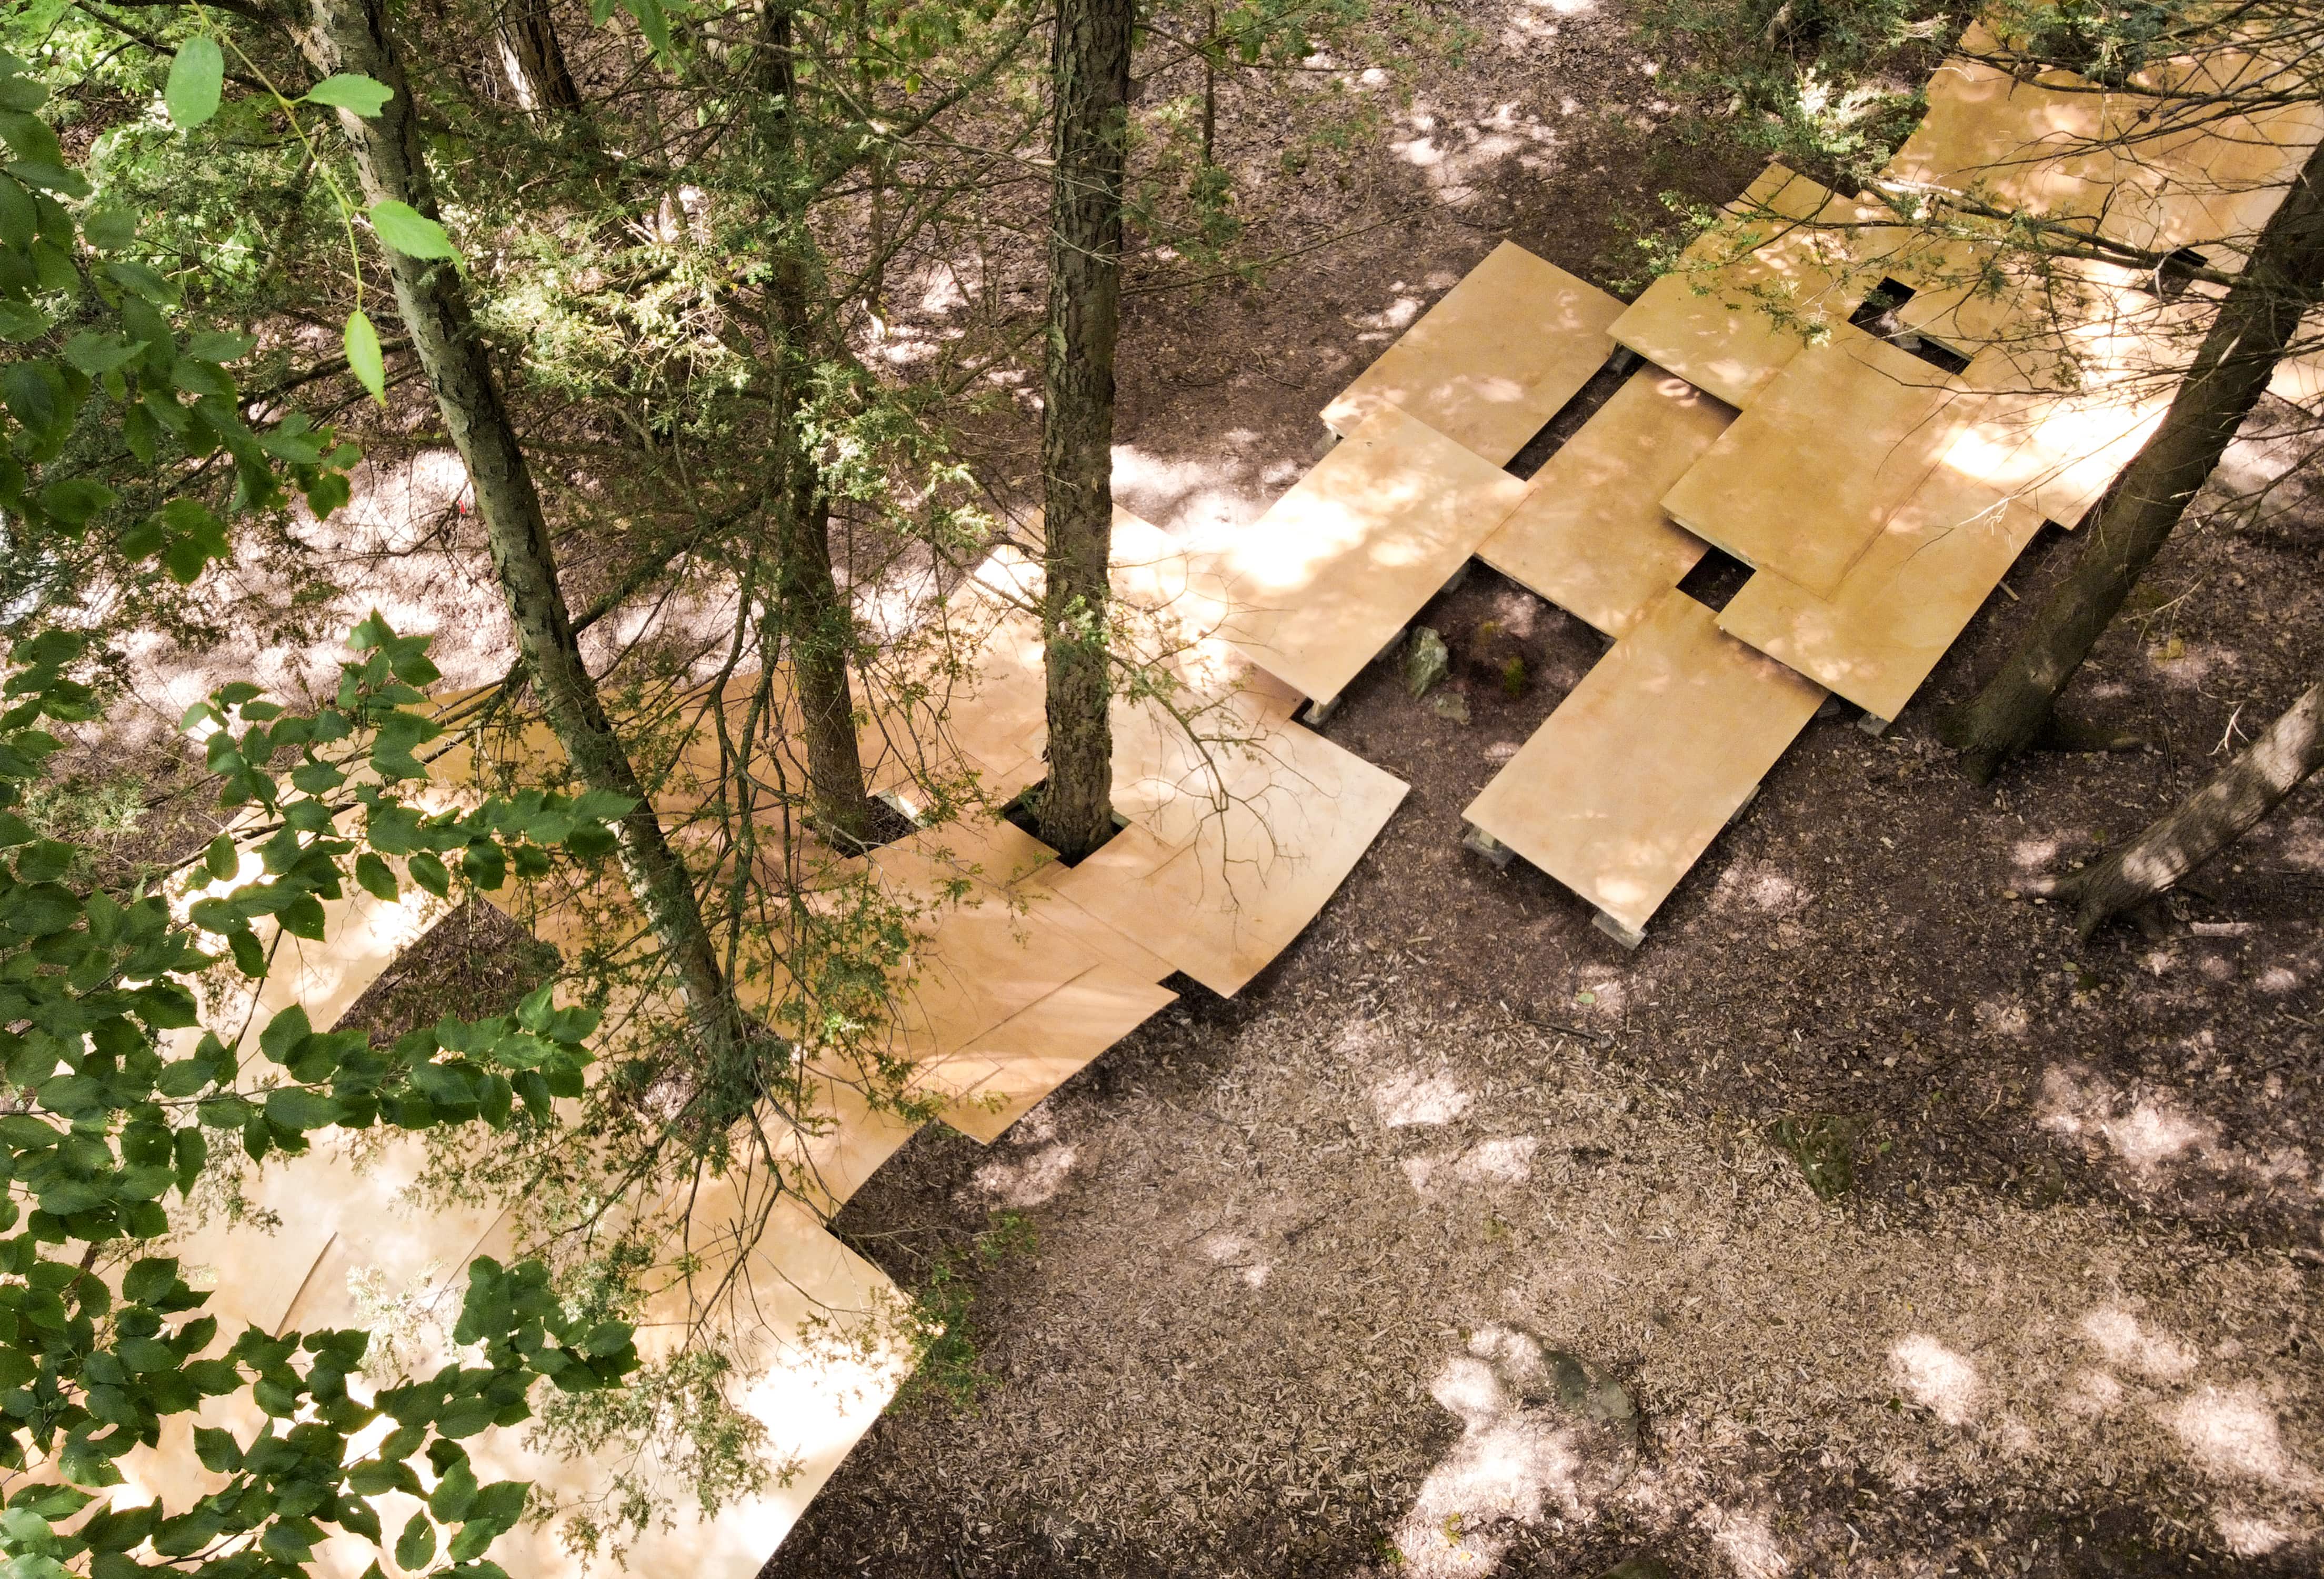 Arrangement of Plywood Boards in Peak A Boo Installation